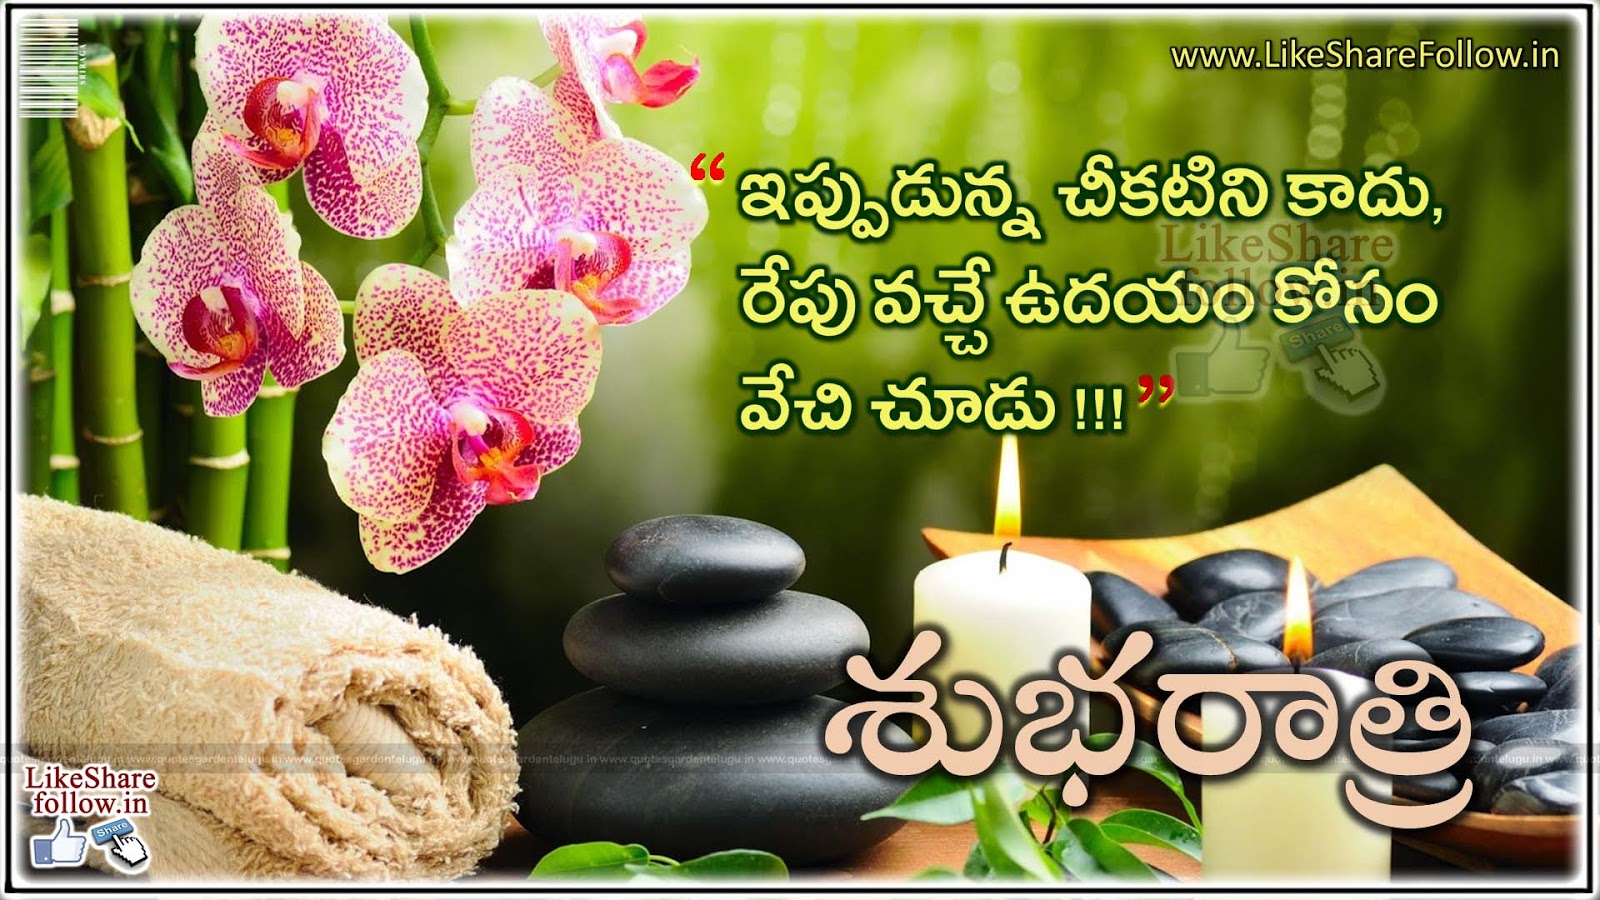 Telugu Good Night Quotes for Friends | Like Share Follow